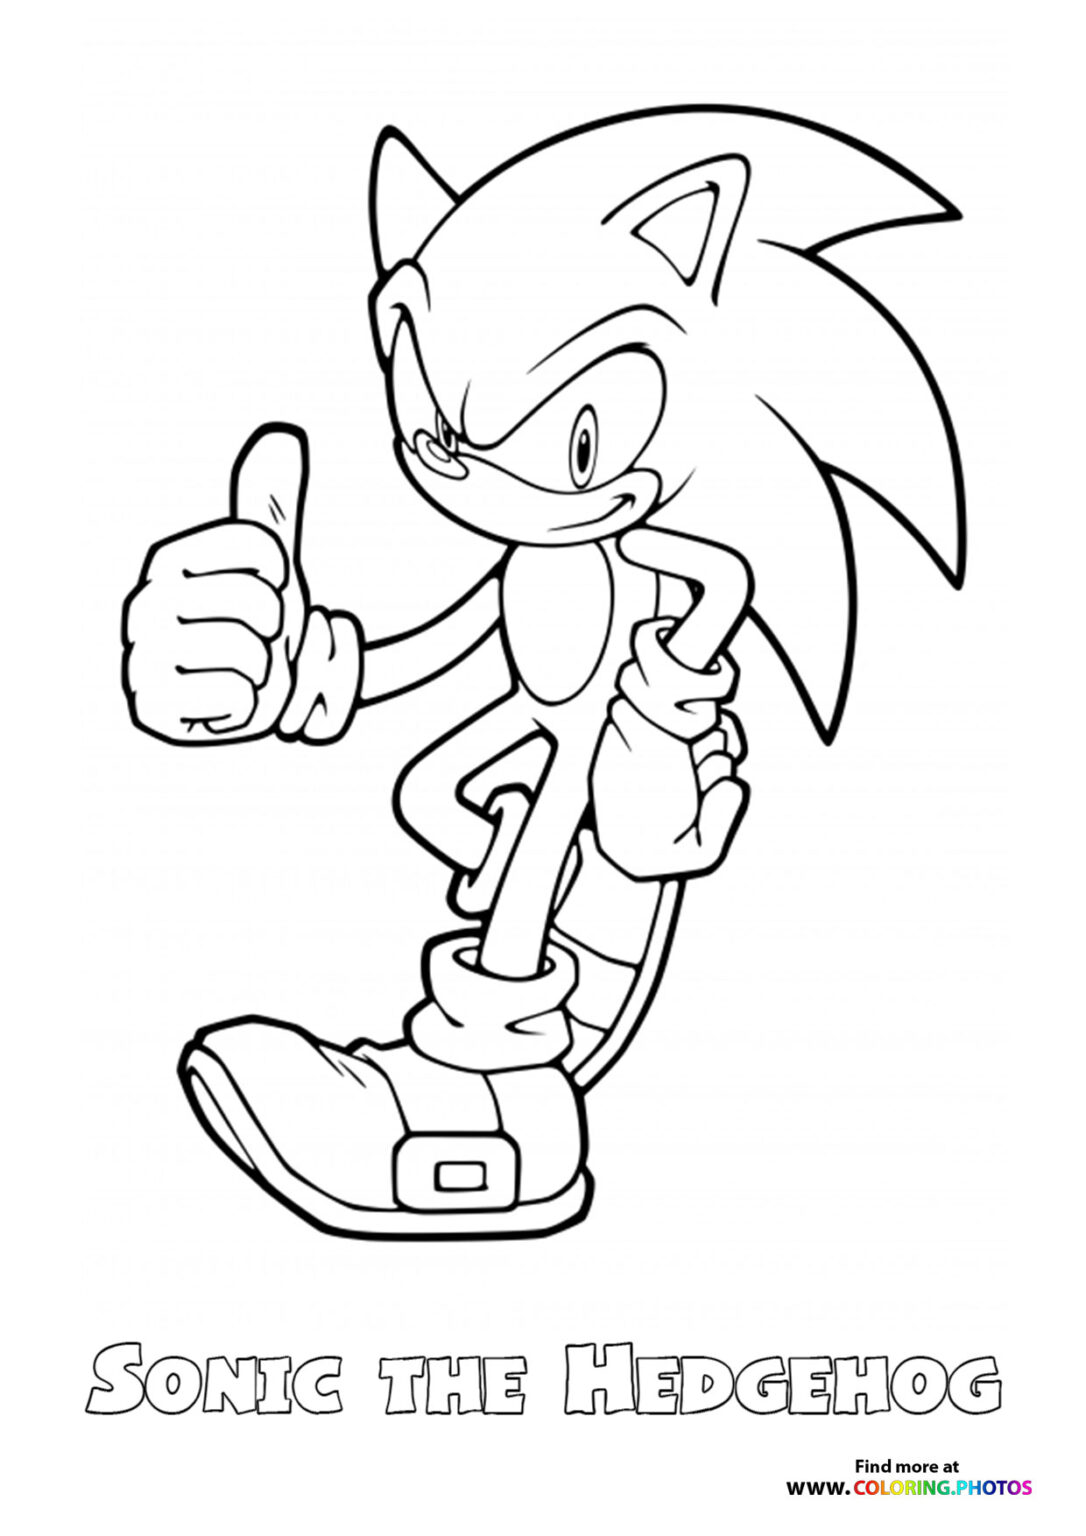 Knuckle thumbs up - Coloring Pages for kids